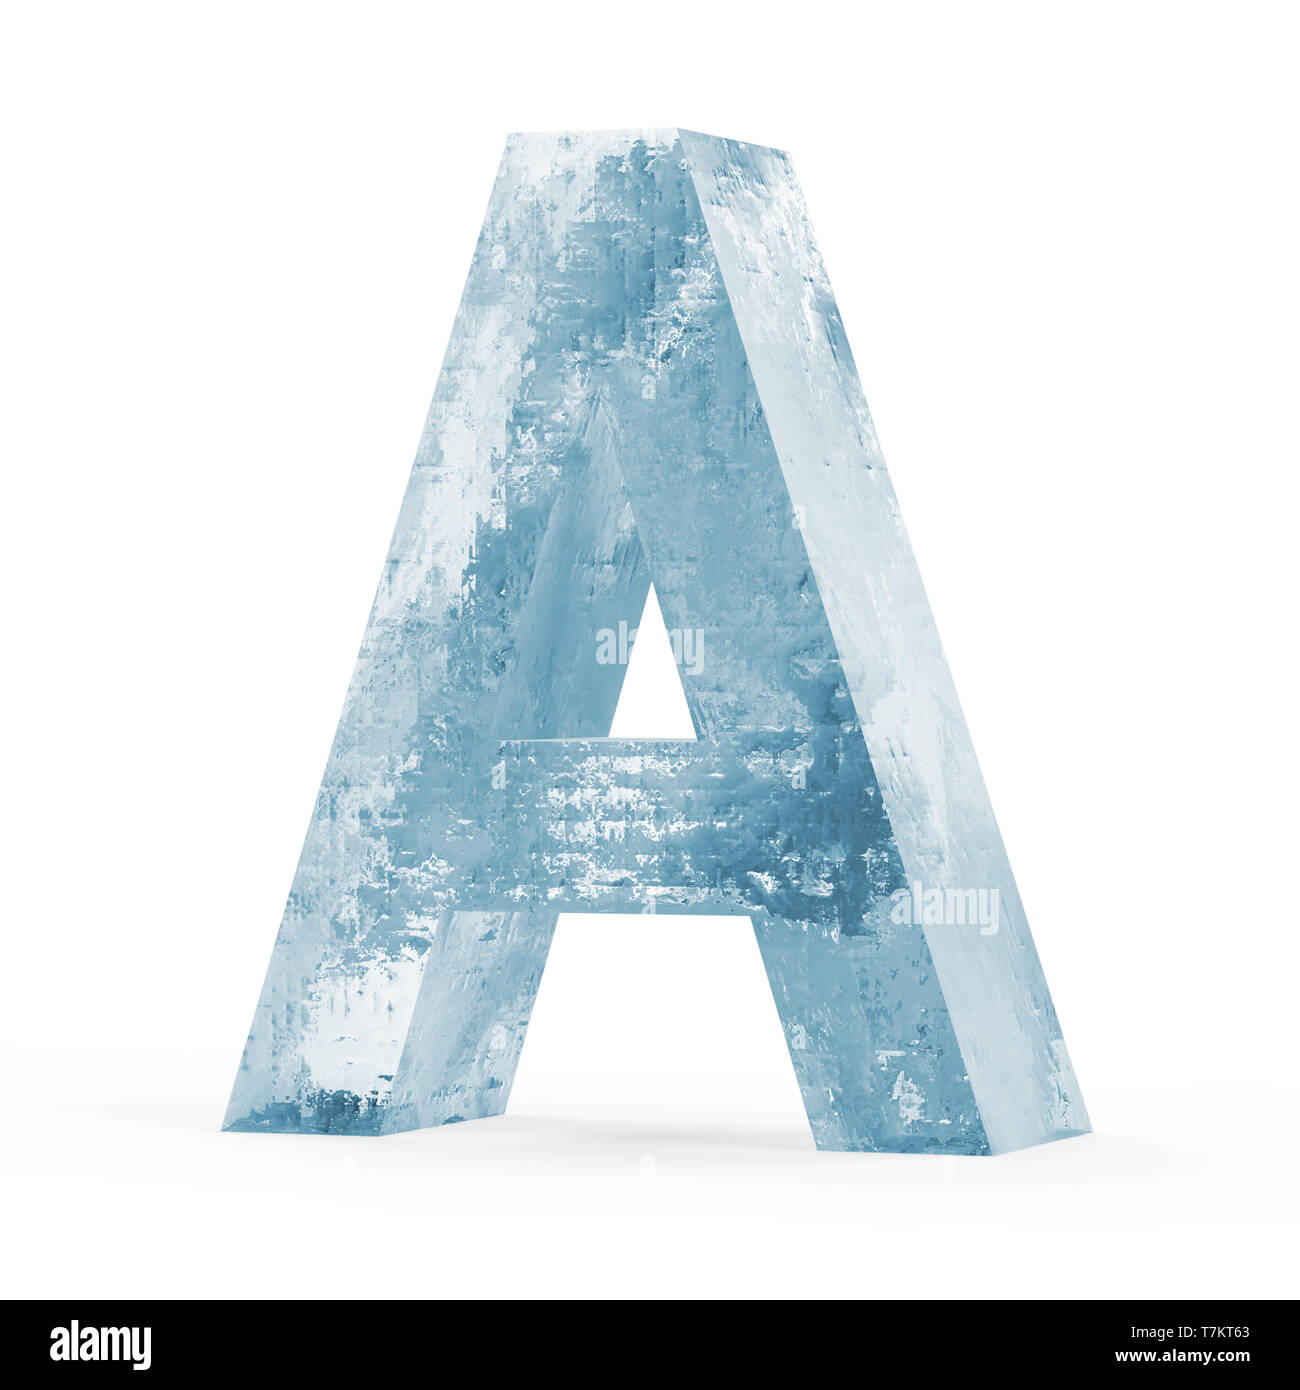 Icy Letters isolated on white background (Letter A) Stock Photo